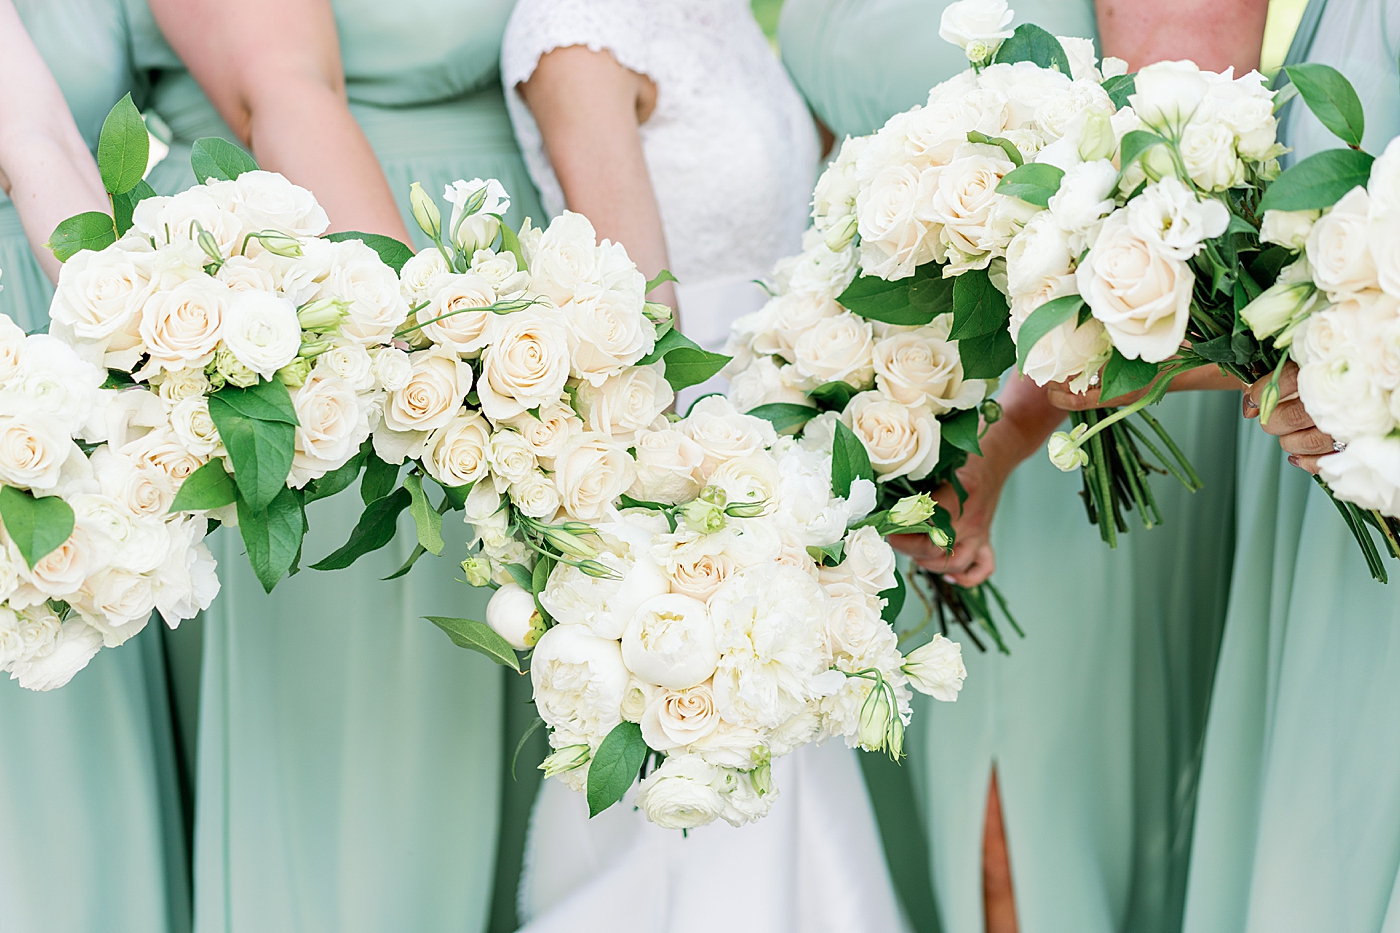 Bridesmaids in green dresses holding their wedding flowers | Image by Annie Laura Photo